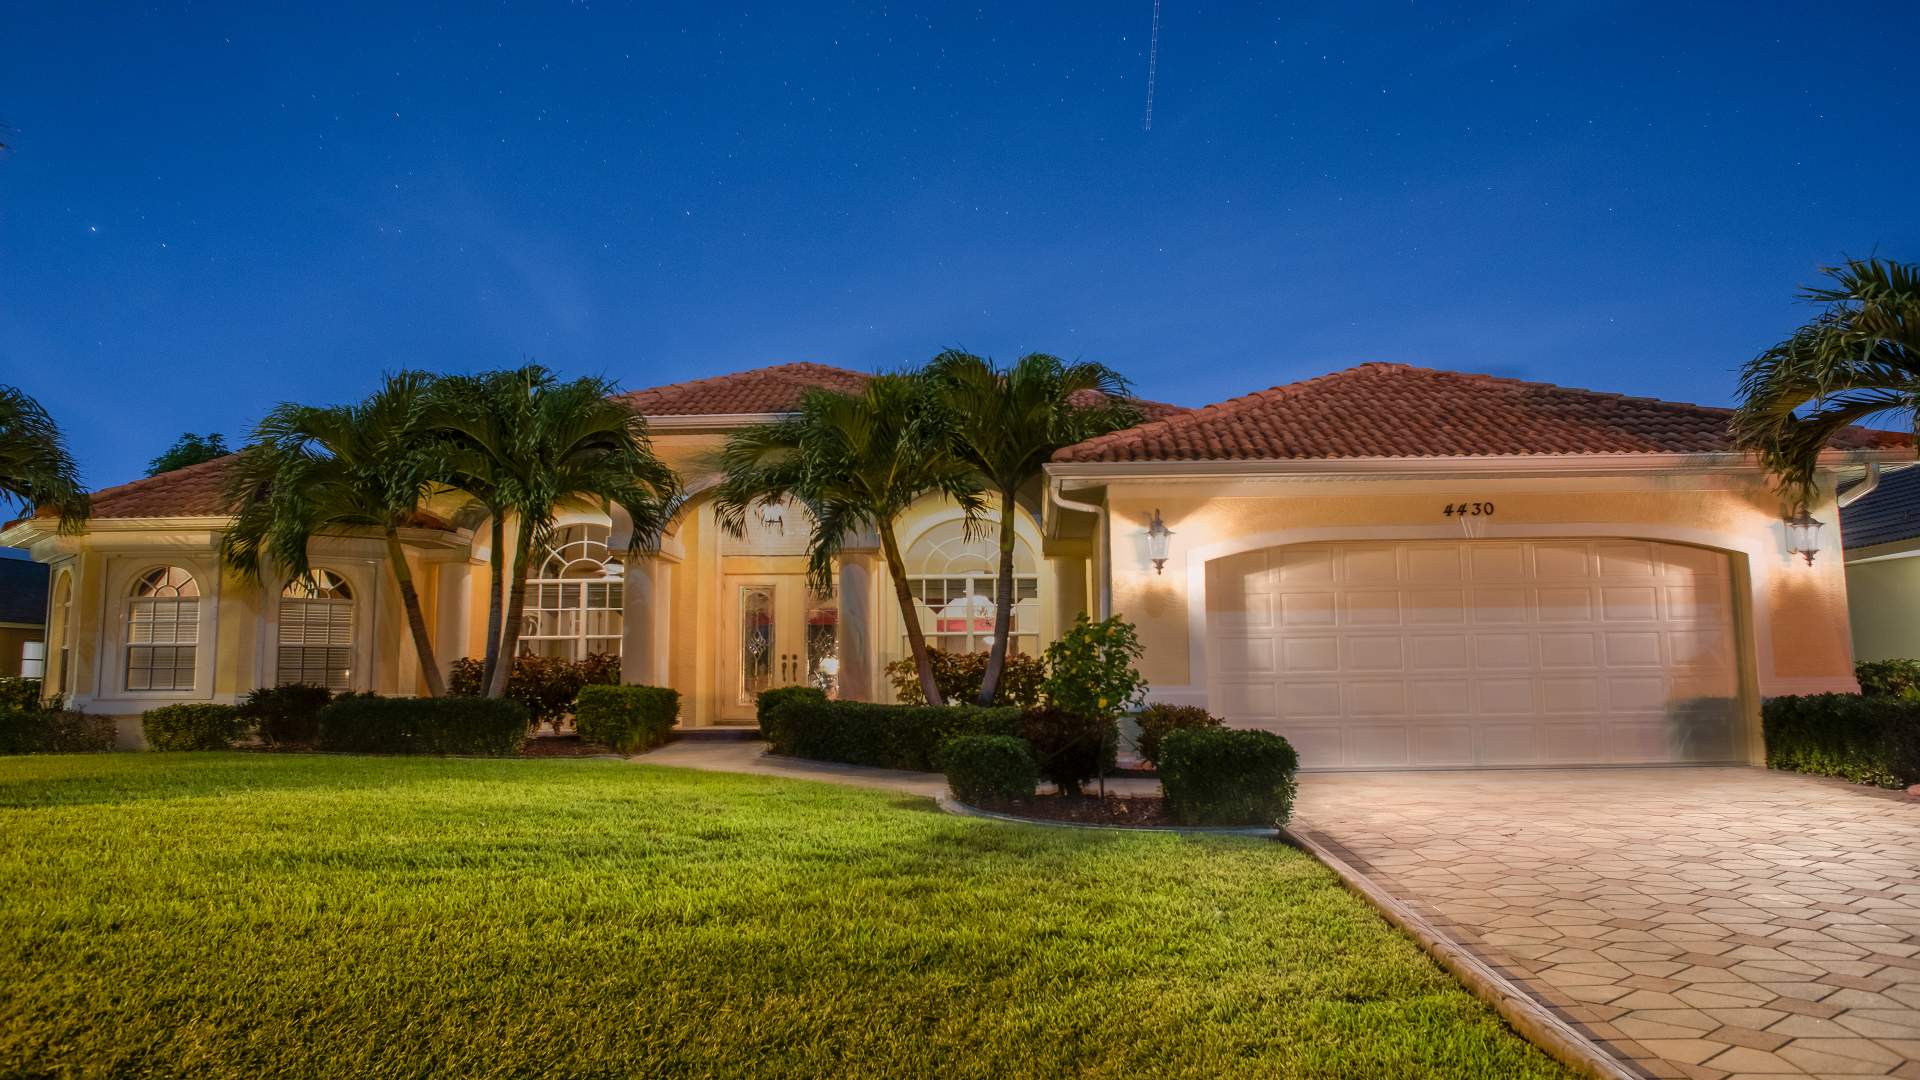 Vacation home with an exotic touch: Villa Black Diamond in Cape Coral